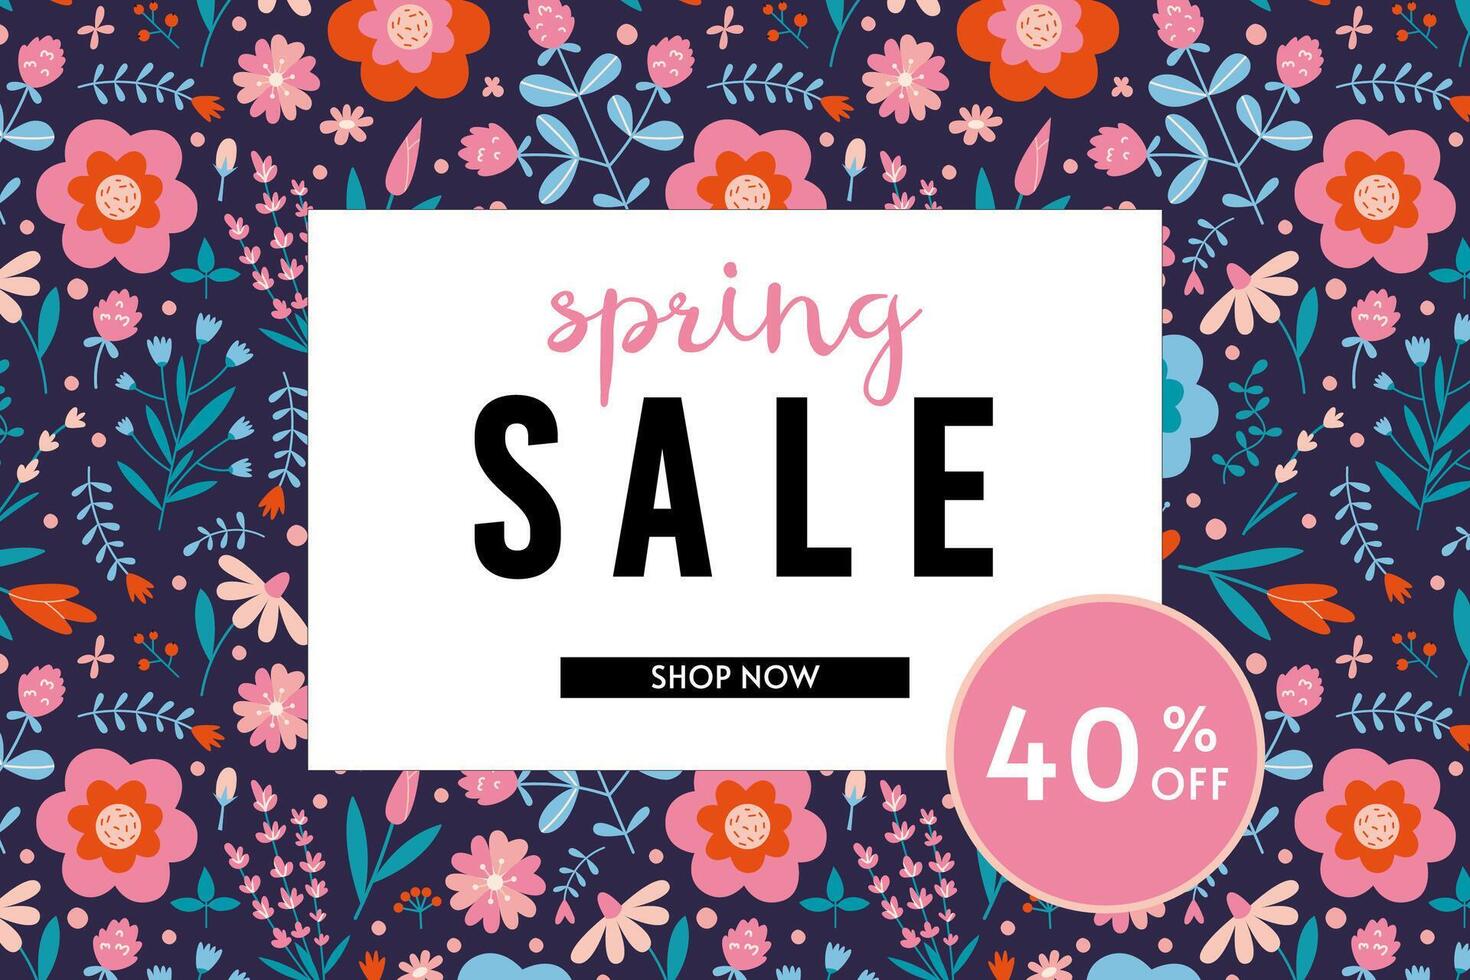 Spring sale 40 p.c. off banner template, cartoon style. Discount promotion layout poster for web or social media, advertising, leaflets and flyers. Trendy modern vector illustration, hand drawn